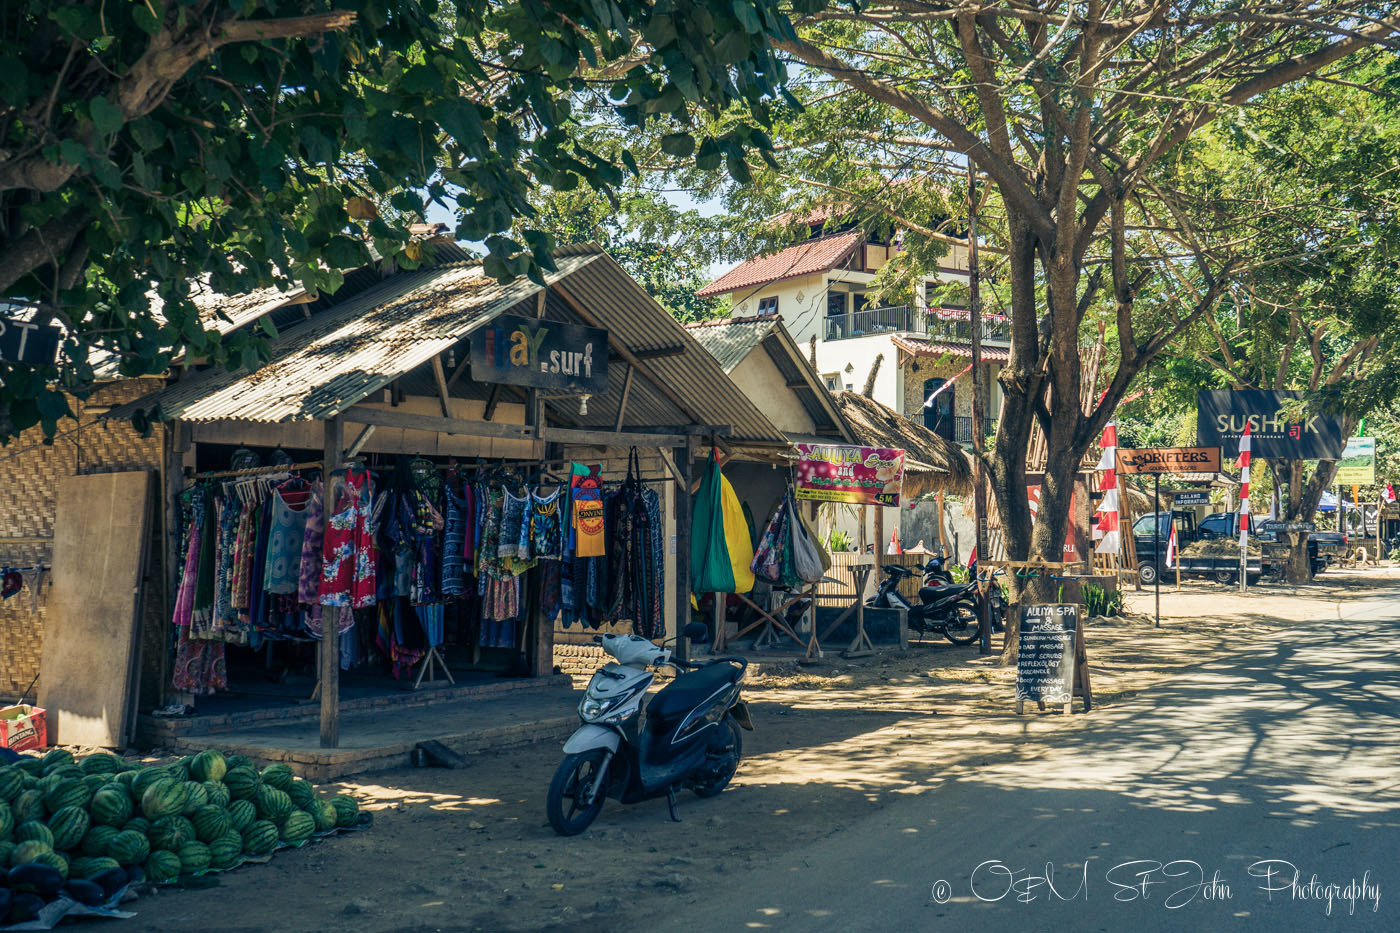 The town of Kuta in Lombok is an ideal place to organize any trips or onwards travel in Lombok